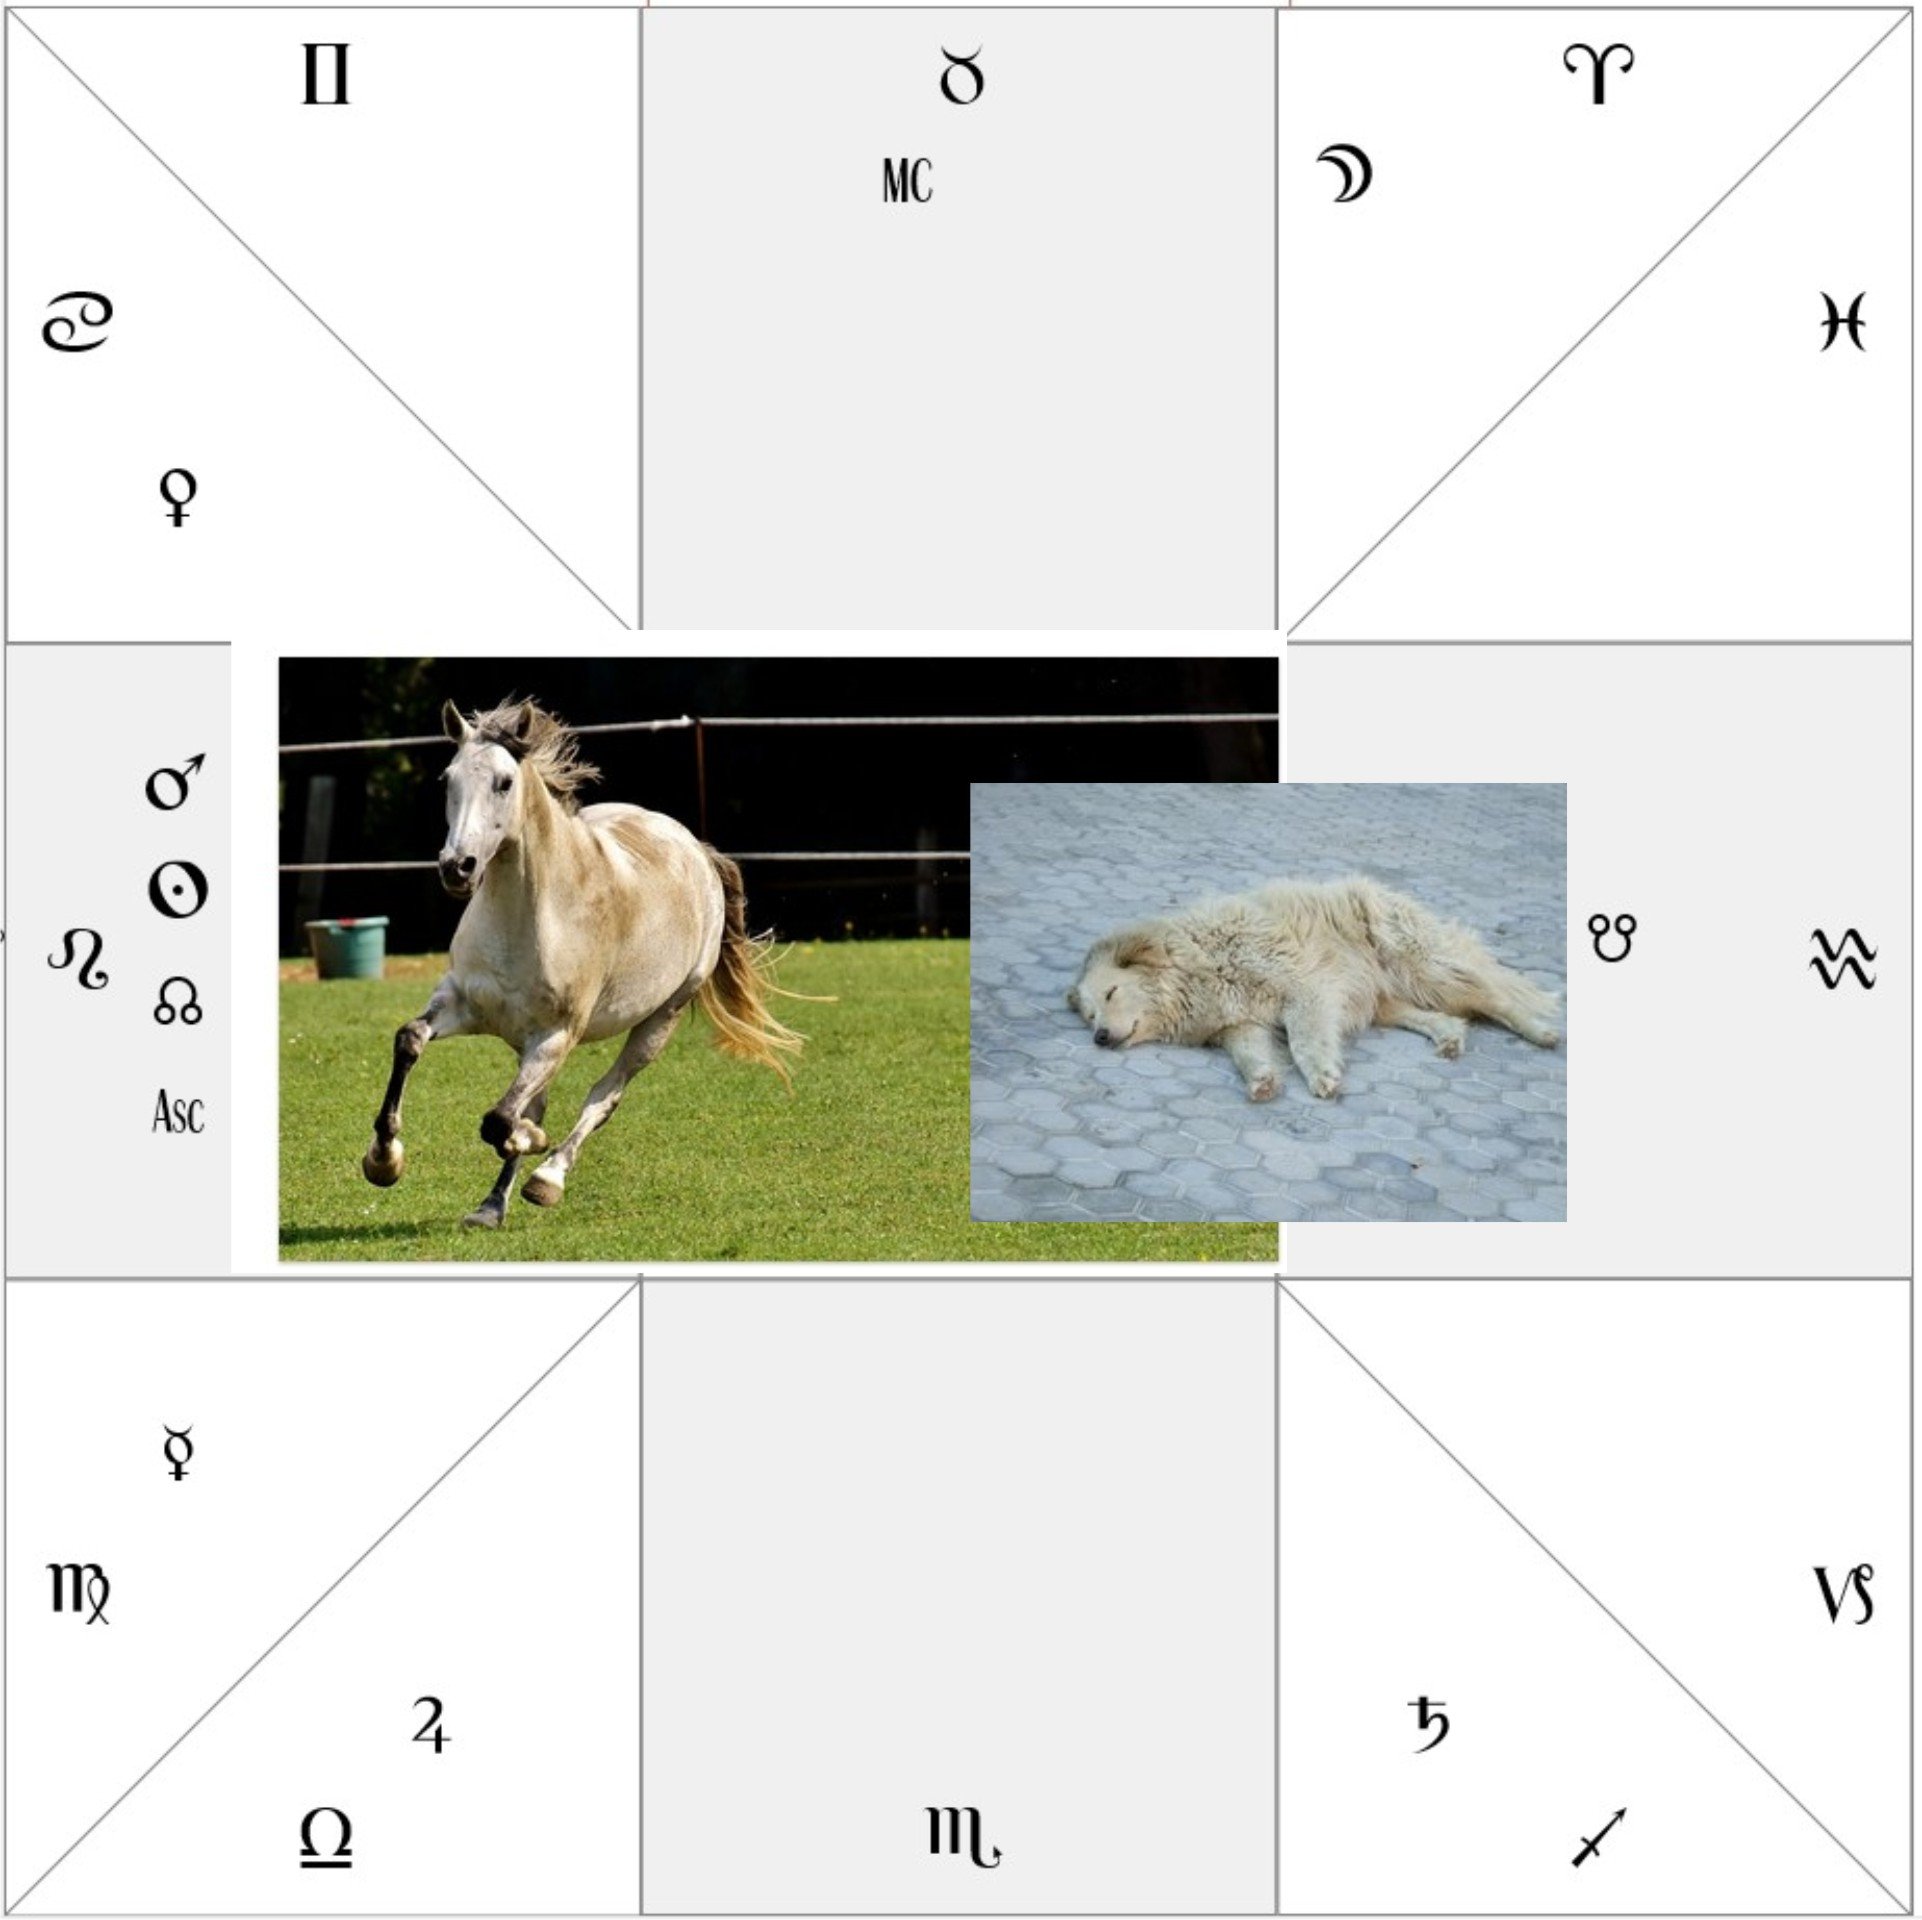 Injury by horses in Astrology